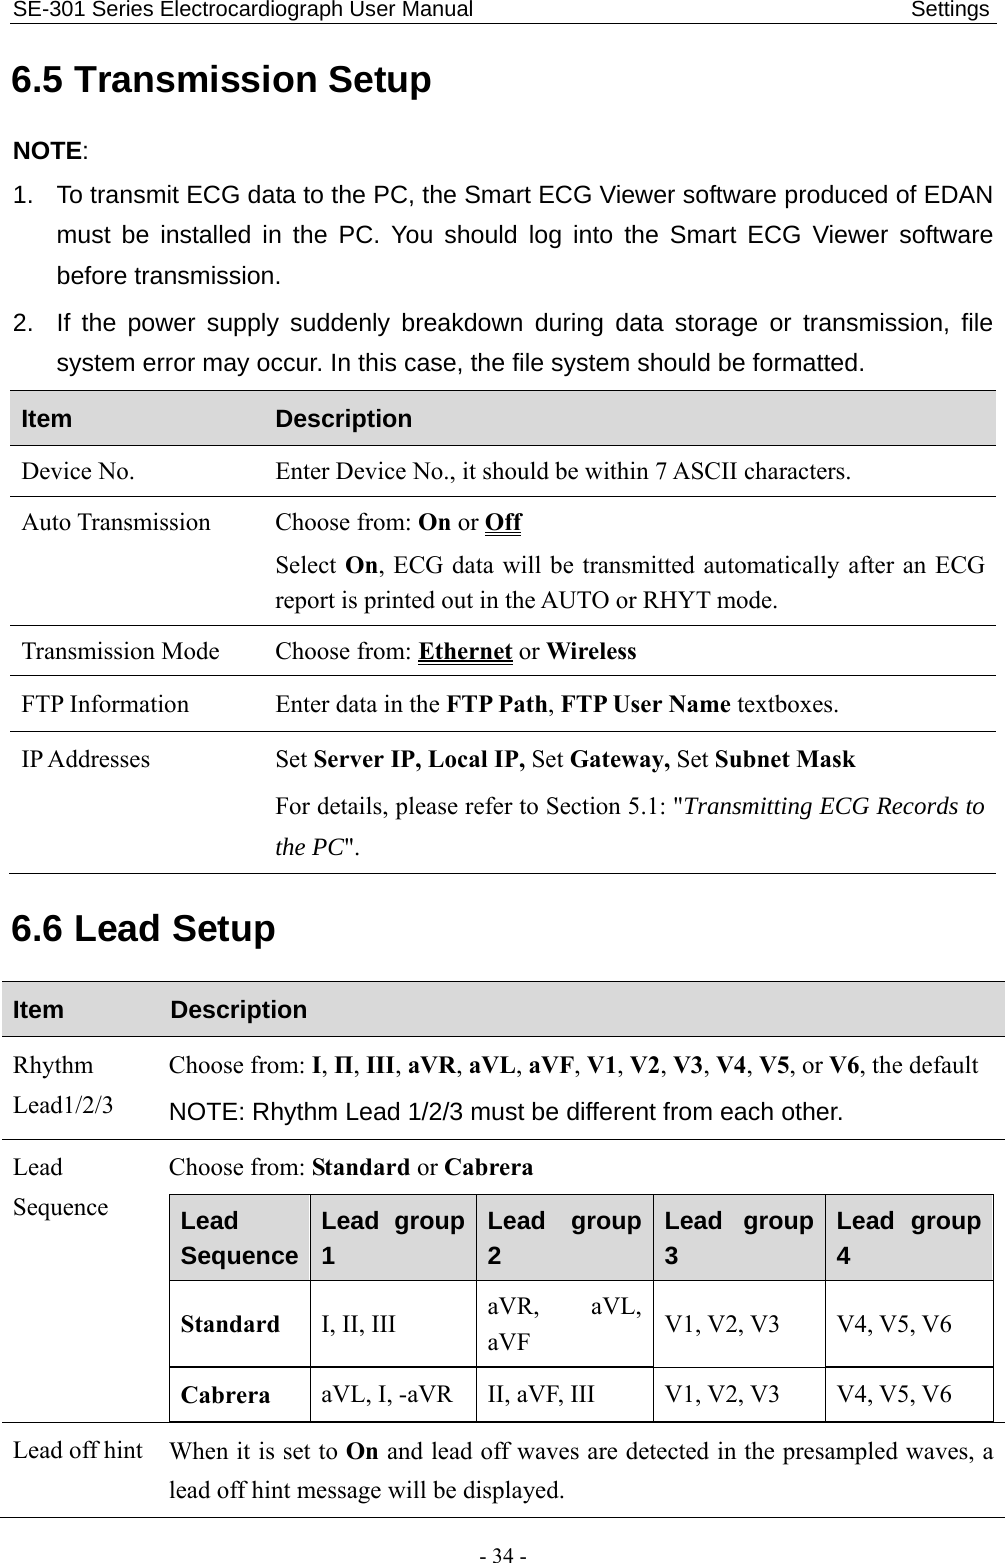 SE-301 Series Electrocardiograph User Manual                                        Settings - 34 - 6.5 Transmission Setup   NOTE: 1.  To transmit ECG data to the PC, the Smart ECG Viewer software produced of EDAN must be installed in the PC. You should log into the Smart ECG Viewer software before transmission. 2.  If the power supply suddenly breakdown during data storage or transmission, file system error may occur. In this case, the file system should be formatted. Item Description Device No.  Enter Device No., it should be within 7 ASCII characters. Auto Transmission  Choose from: On or Off Select On, ECG data will be transmitted automatically after an ECG report is printed out in the AUTO or RHYT mode. Transmission Mode  Choose from: Ethernet or Wireless FTP Information  Enter data in the FTP Path, FTP User Name textboxes. IP Addresses  Set Server IP, Local IP, Set Gateway, Set Subnet Mask For details, please refer to Section 5.1: &quot;Transmitting ECG Records to the PC&quot;. 6.6 Lead Setup Item Description Rhythm Lead1/2/3 Choose from: І, П, III, aVR, aVL, aVF, V1, V2, V3, V4, V5, or V6, the default NOTE: Rhythm Lead 1/2/3 must be different from each other. Lead Sequence Choose from: Standard or Cabrera Lead Sequence Lead group 1 Lead group 2 Lead group 3 Lead group 4 Standard  І, II, III aVR, aVL, aVF V1, V2, V3 V4, V5, V6 Cabrera  aVL, І, -aVR II, aVF, III V1, V2, V3 V4, V5, V6  Lead off hint  When it is set to On and lead off waves are detected in the presampled waves, a lead off hint message will be displayed. 